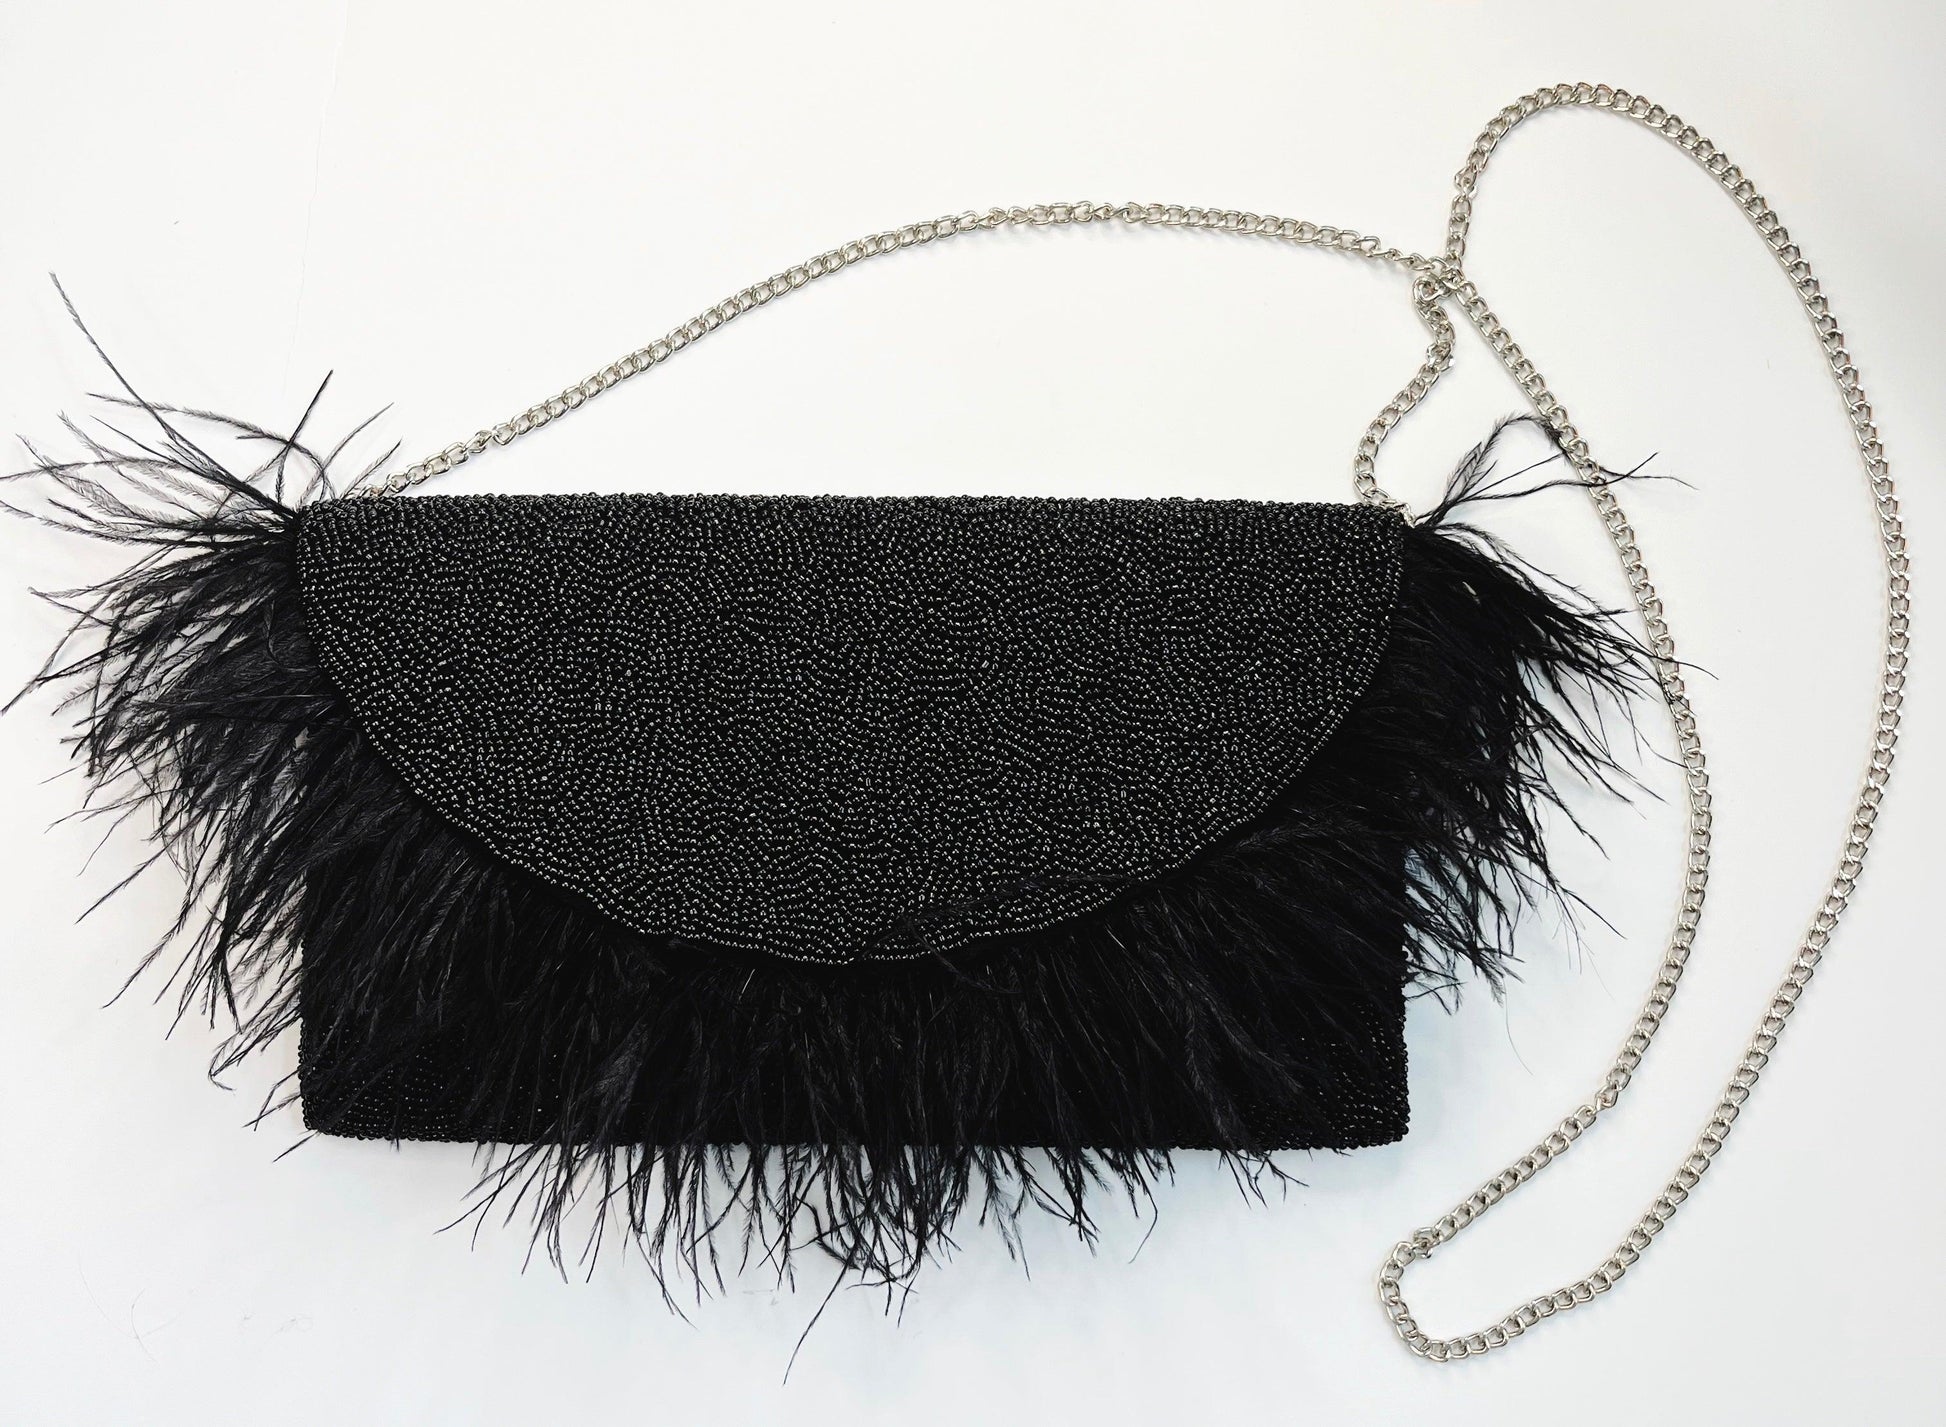 The Black Beaded Party Clutch | MKay Style